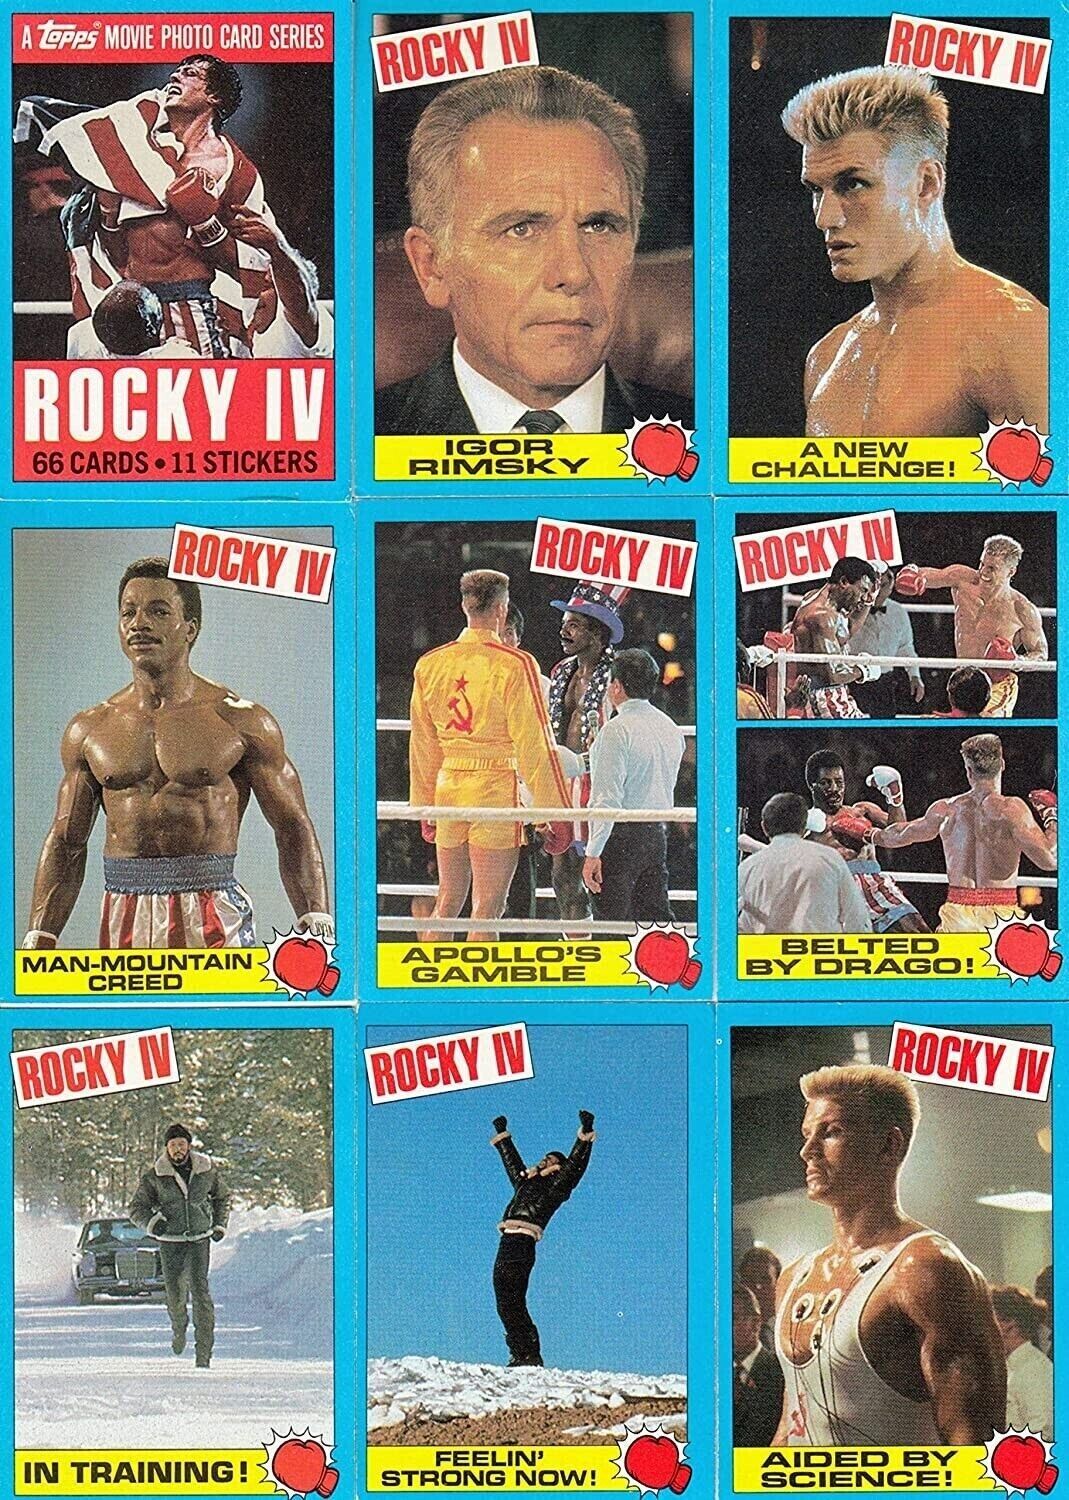 ROCKY 4 TOPPS 1985 SET OF 66 CARDS